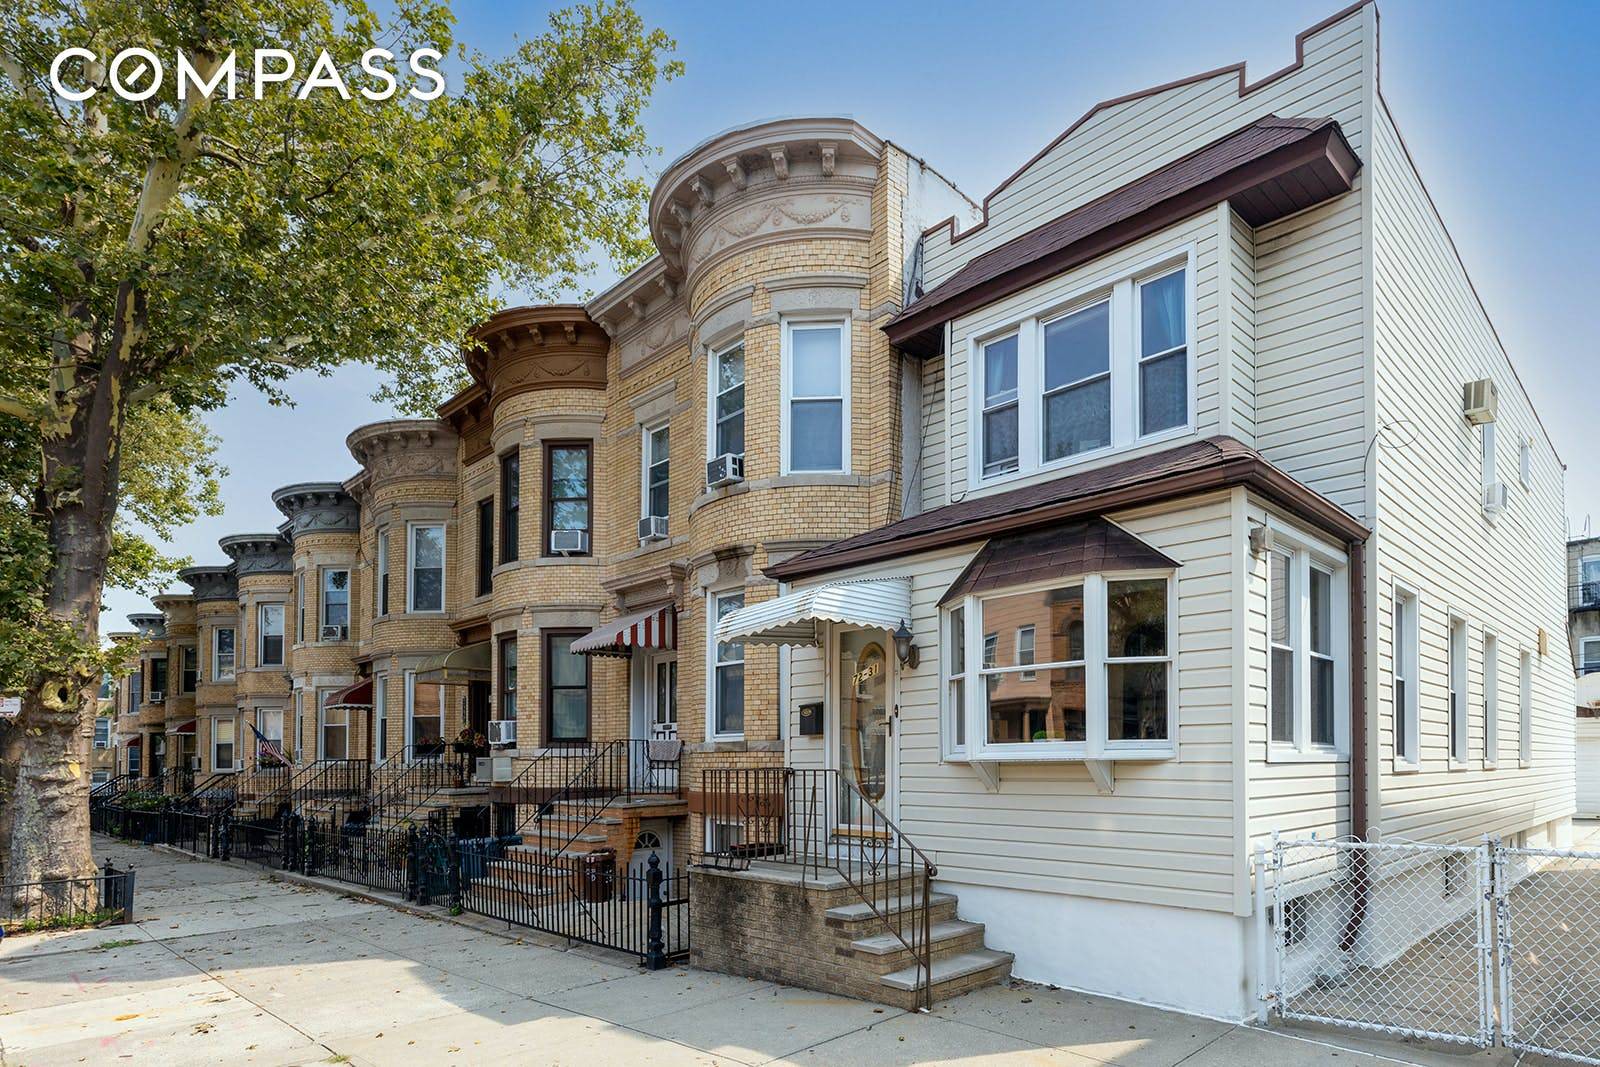 Welcome to 7231 66th Pl, a beautiful single family home in Glendale, Queens offering incredible value and convenience.